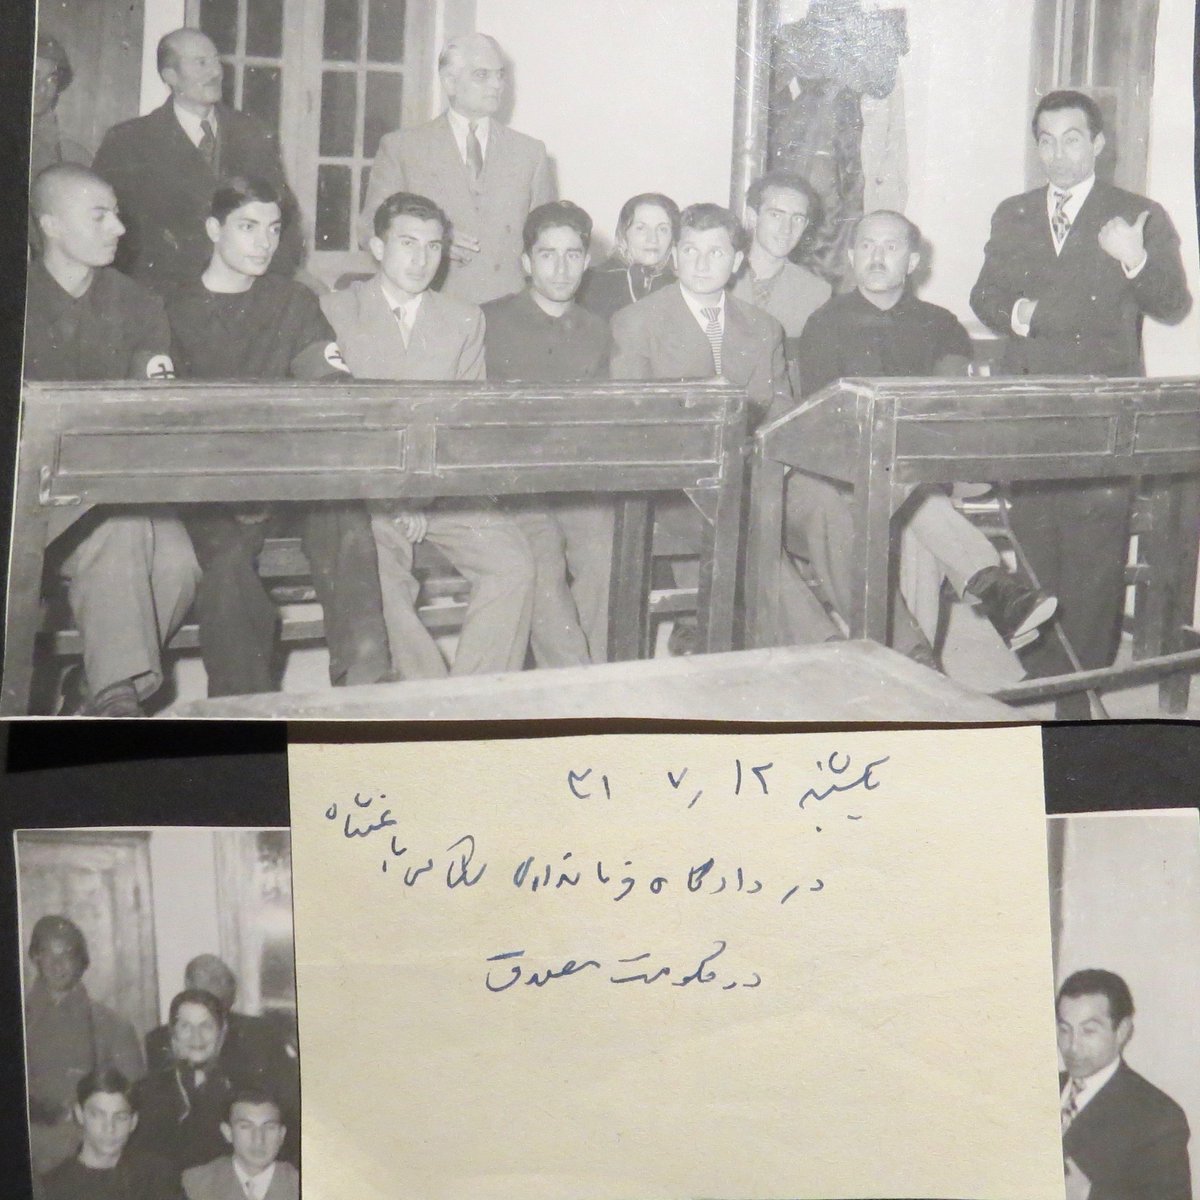 Monshizadeh, Dariush Homayoun and others on trial in 1952